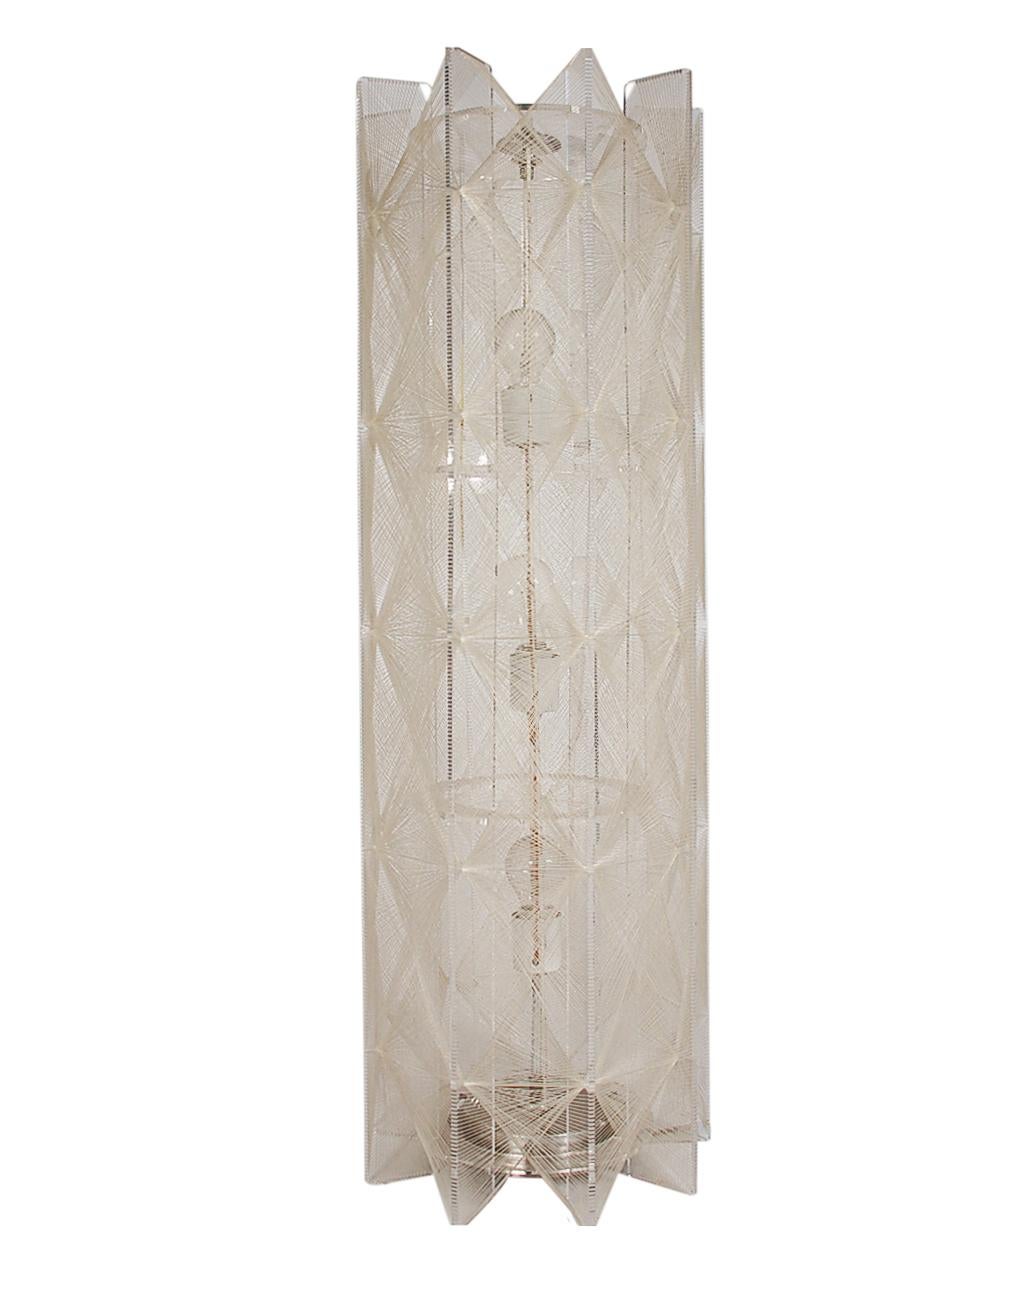 A large and impressive work of art from the early 1970s. This lamp features a clear acrylic frame and nylon string. It works on 3 standard bulbs. Tested and ready for use.